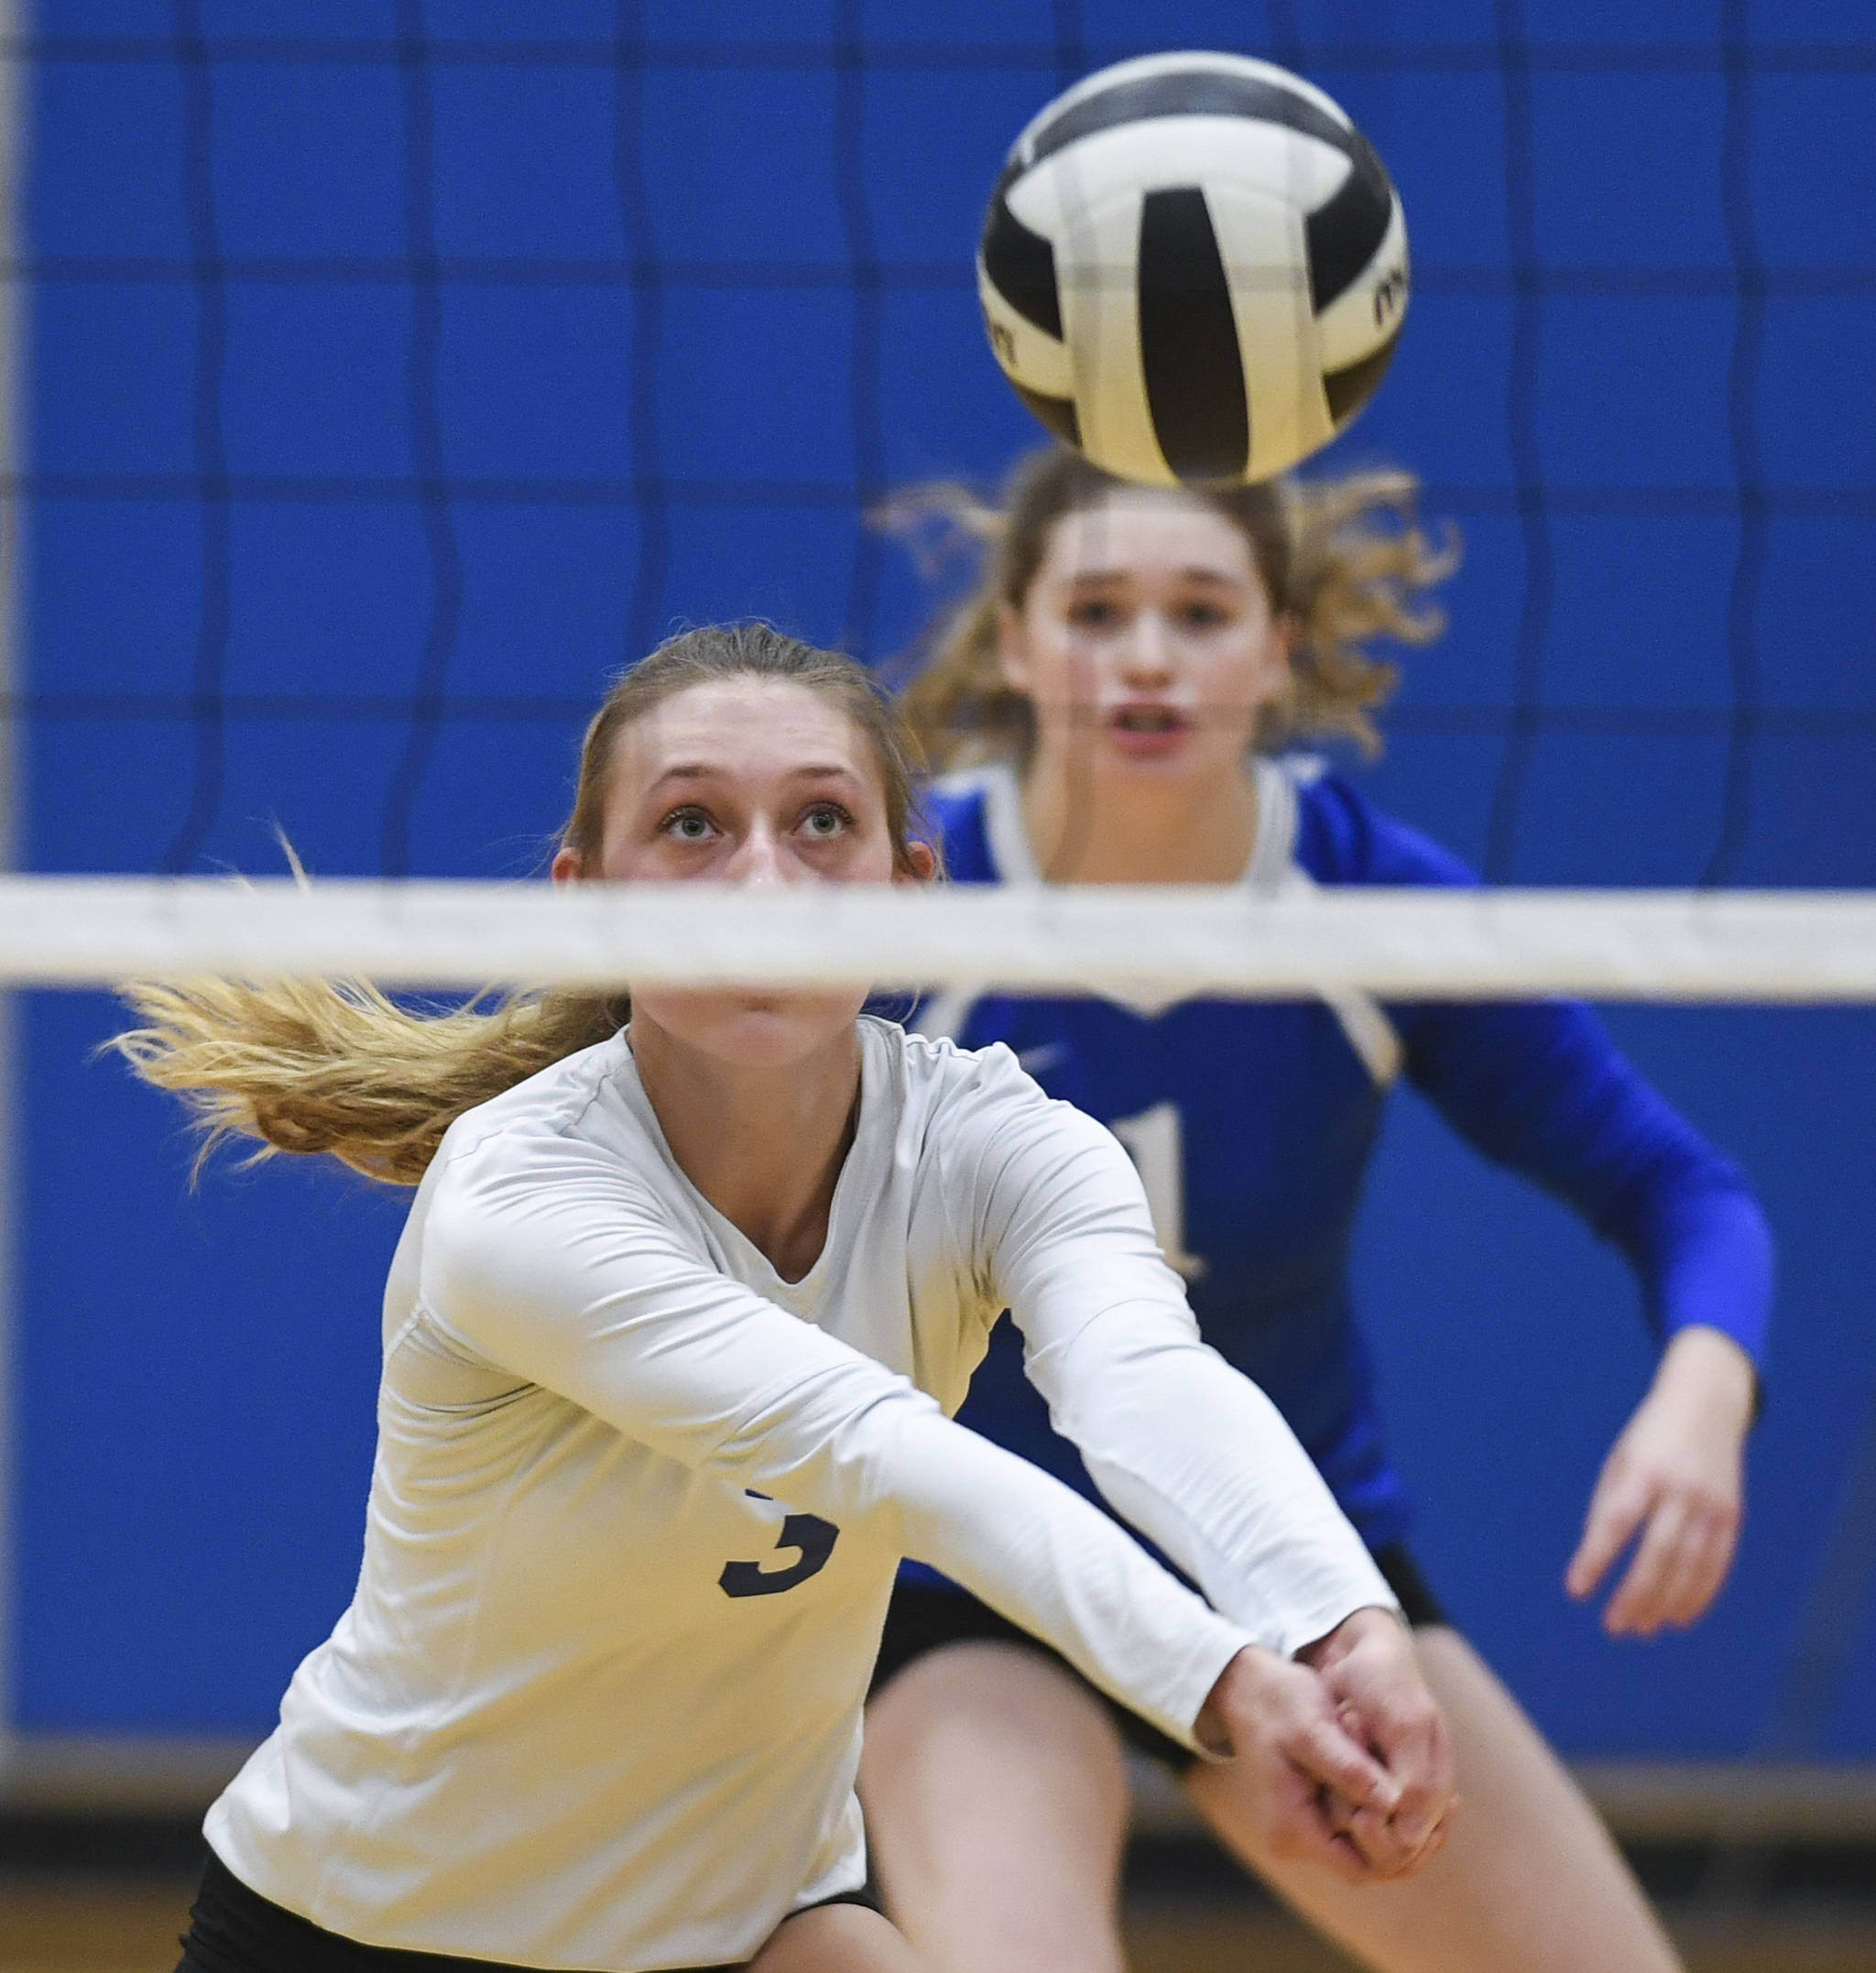 Thunder Mountain’s Lily Smith bumps the ball up against Juneau-Douglas during the Region V Volleyball Tournament at Thunder Mountain High School on Friday, Nov. 8, 2019. JDHS won 25-22, 26-24, 25-20. (Michael Penn | Juneau Empire)